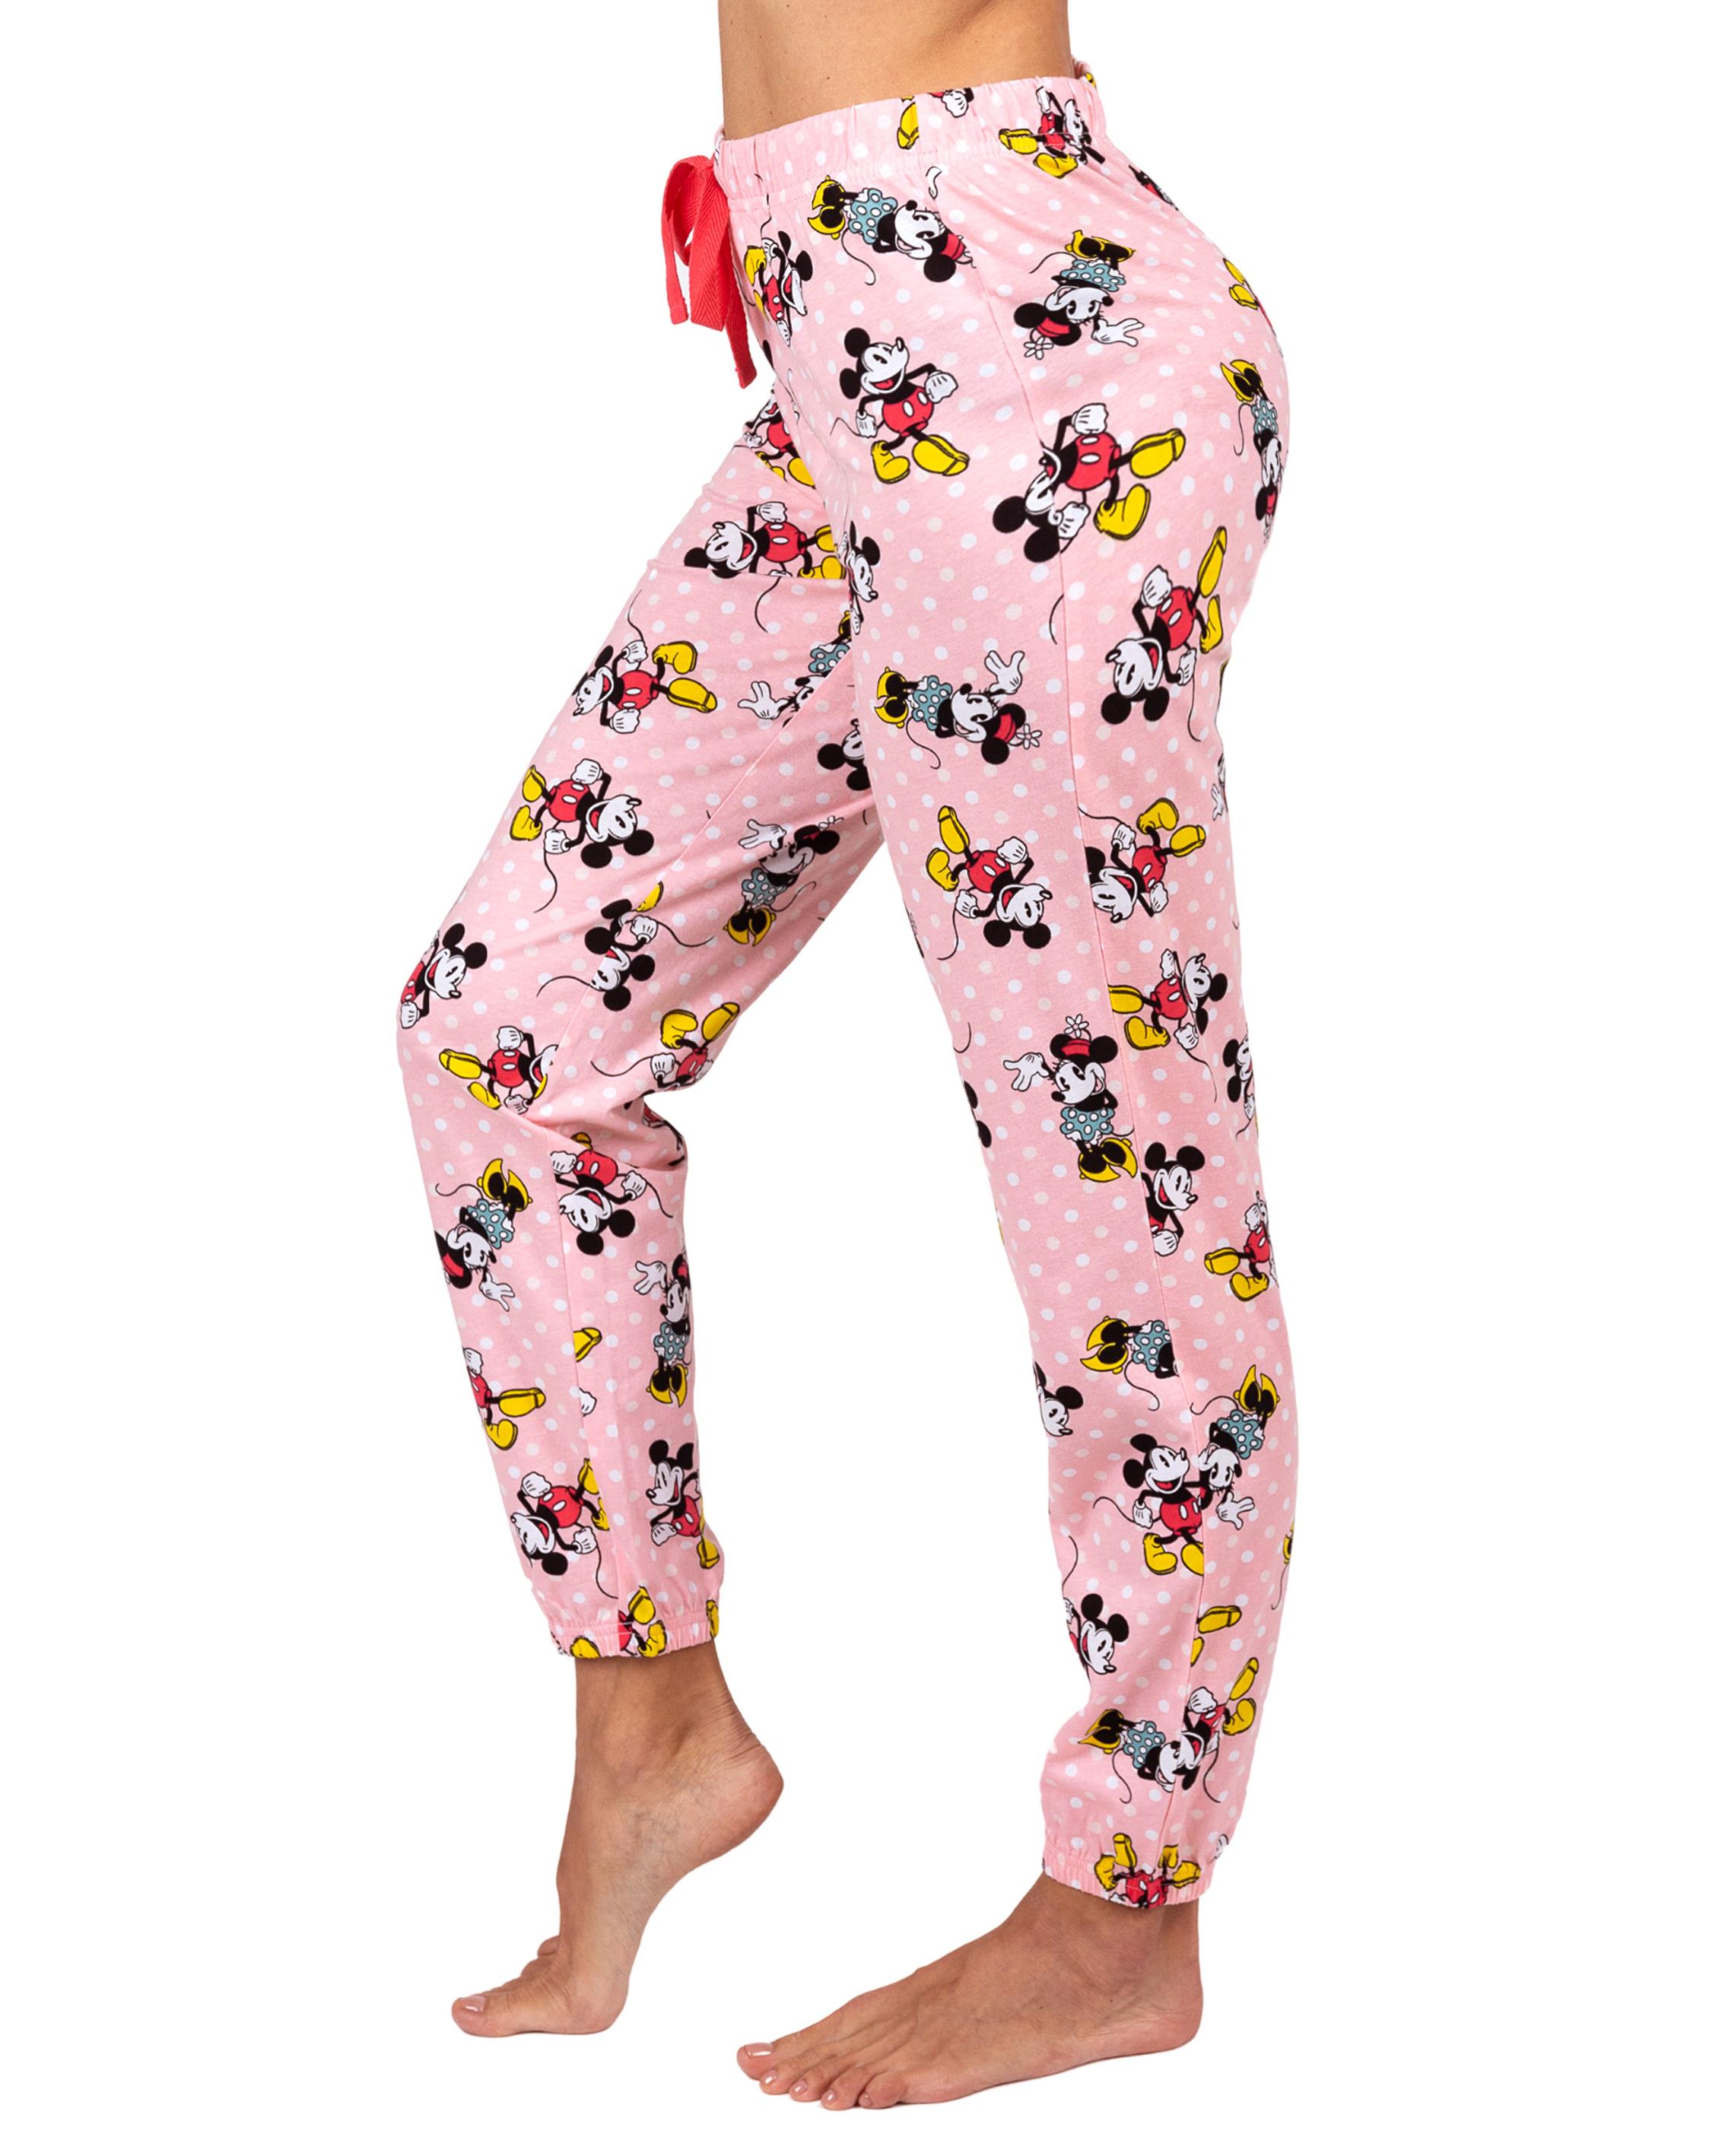 Disney Mickey and Minnie Mouse Womens Cotton Pajama Pants, Sleepwear Bottoms, Mickey and Minnie, Size: 2X, Mickey Mouse - image 1 of 4